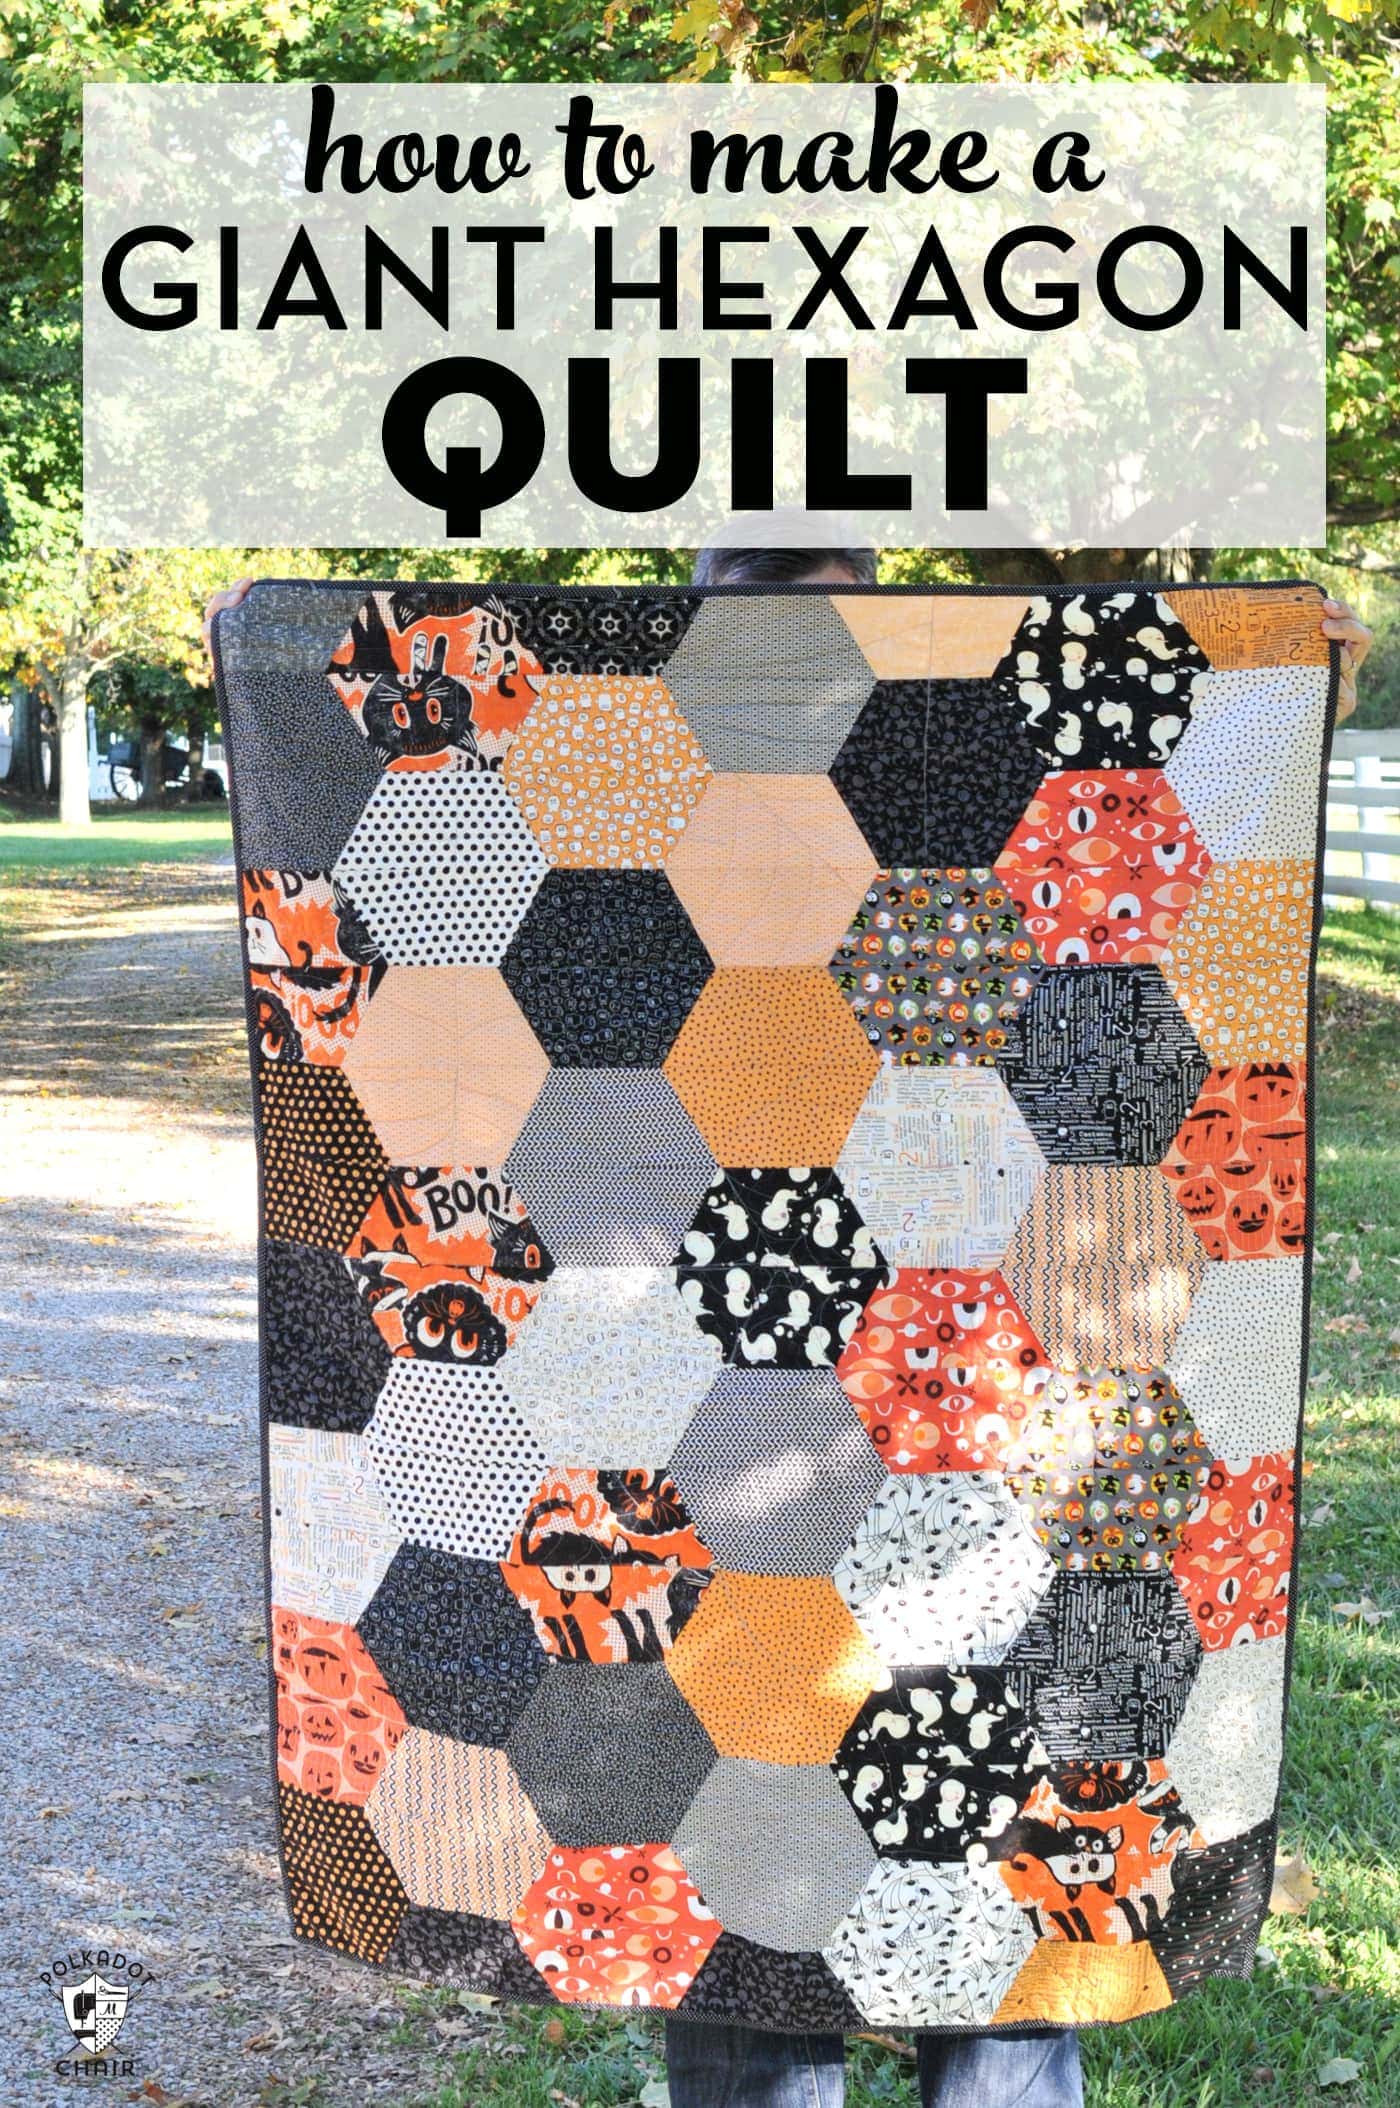 Sewing Quilt Squares Together  How to Make a Quilt Part 2 of 7